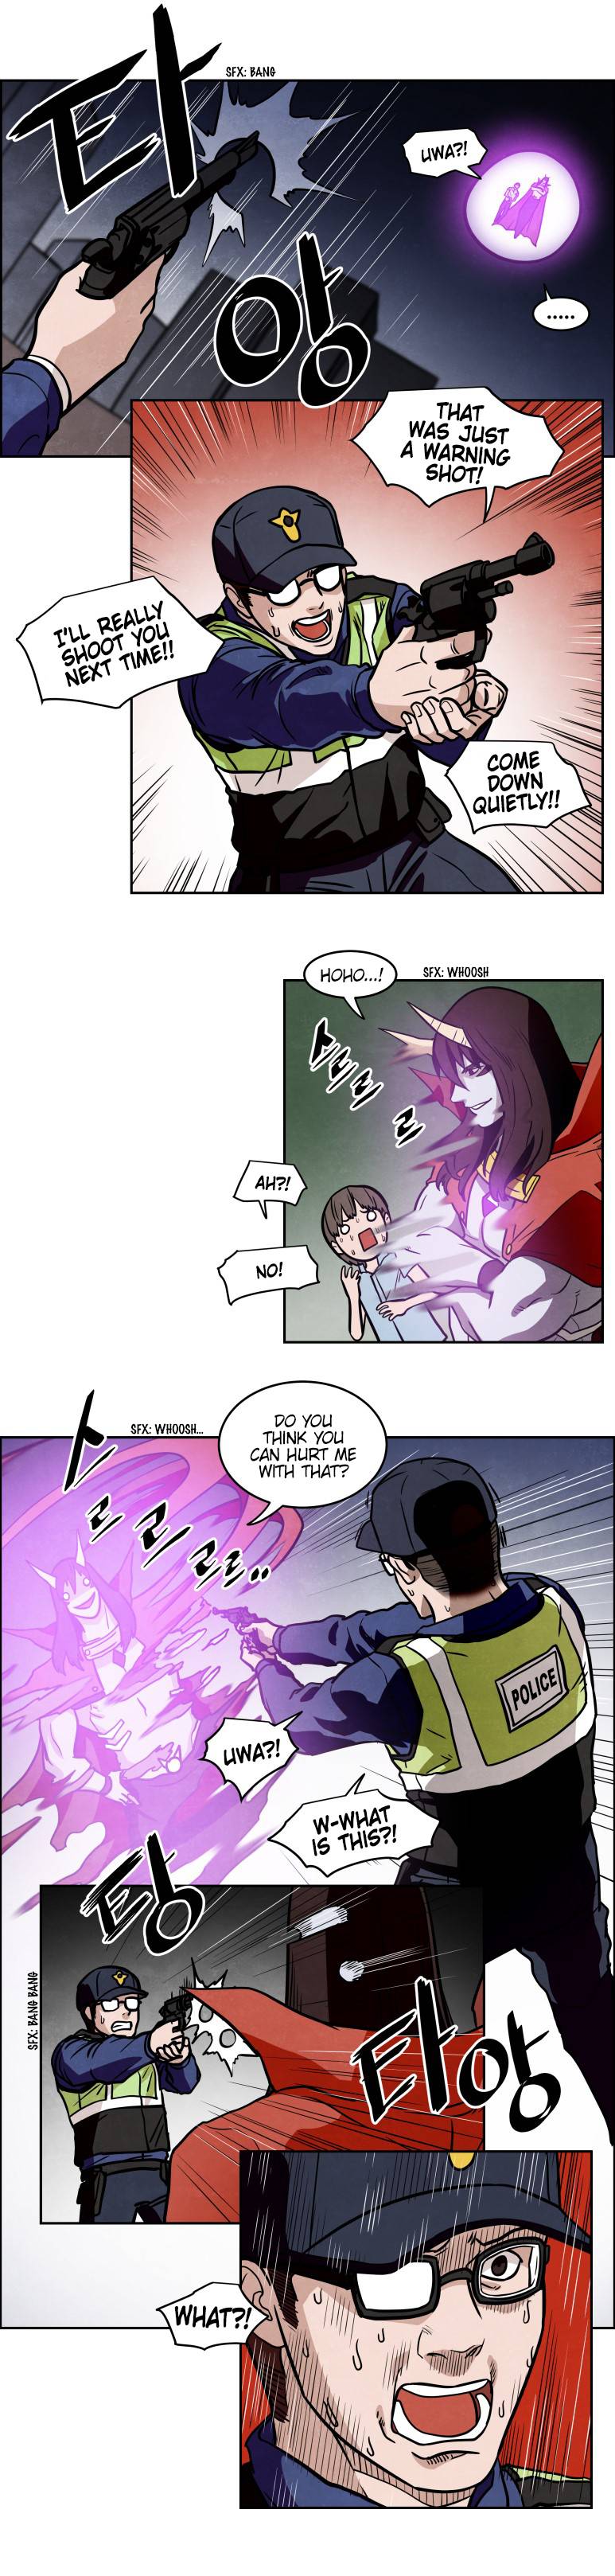 The Devil King In Another World - Page 4